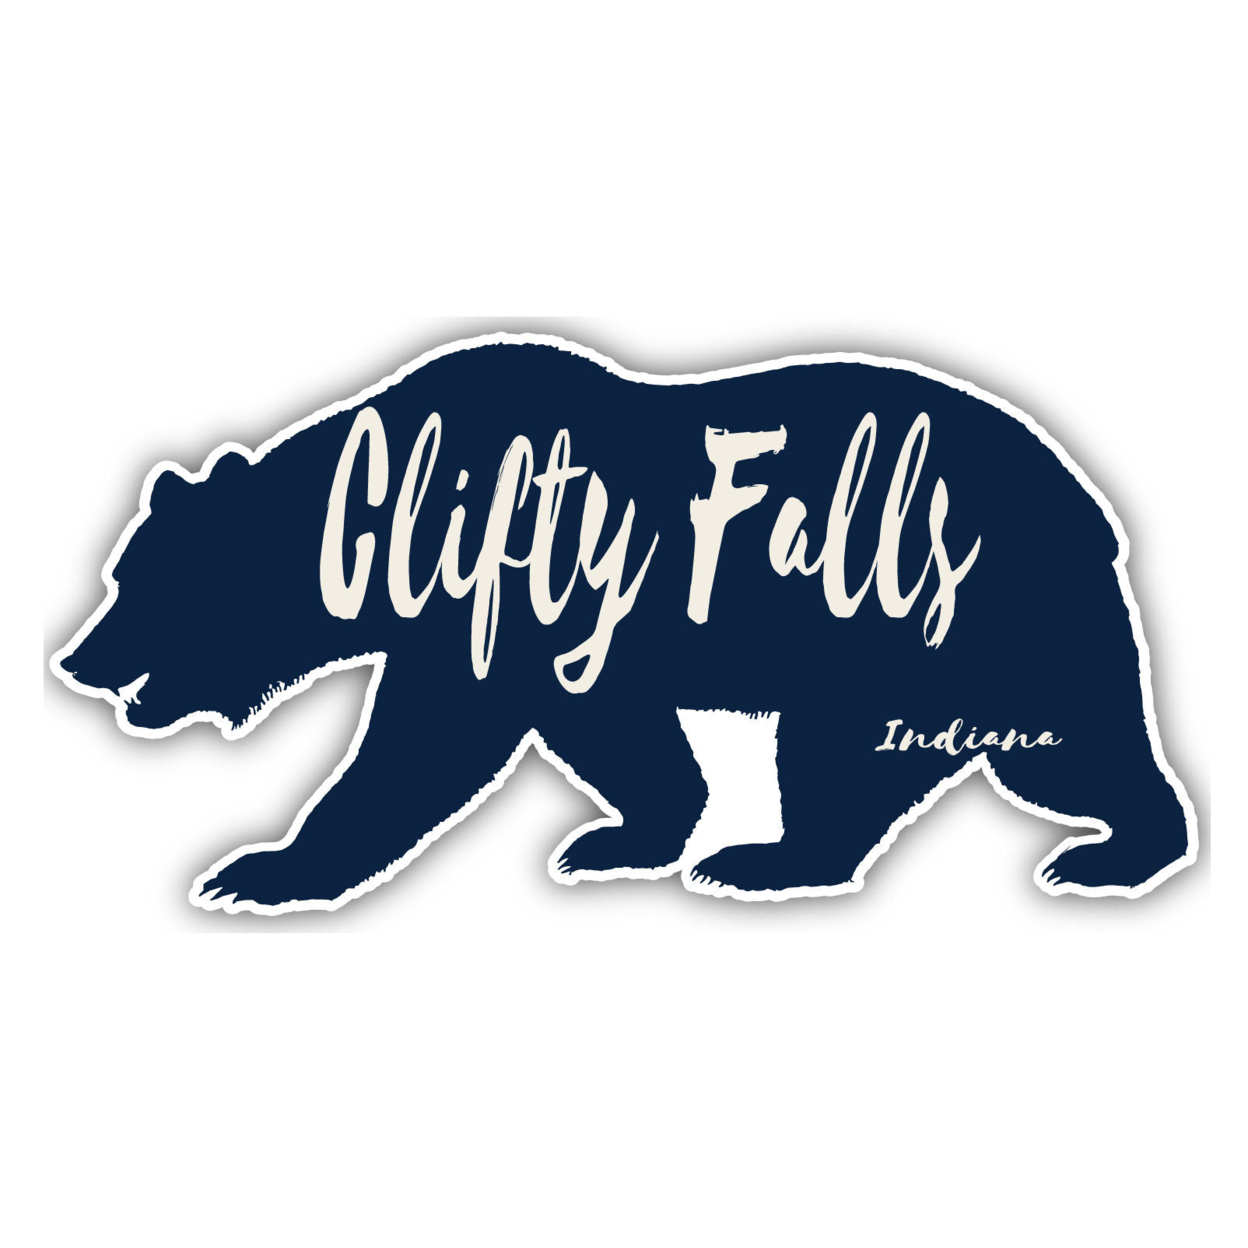 Clifty Falls Indiana Souvenir Decorative Stickers (Choose Theme And Size) - Single Unit, 10-Inch, Great Outdoors